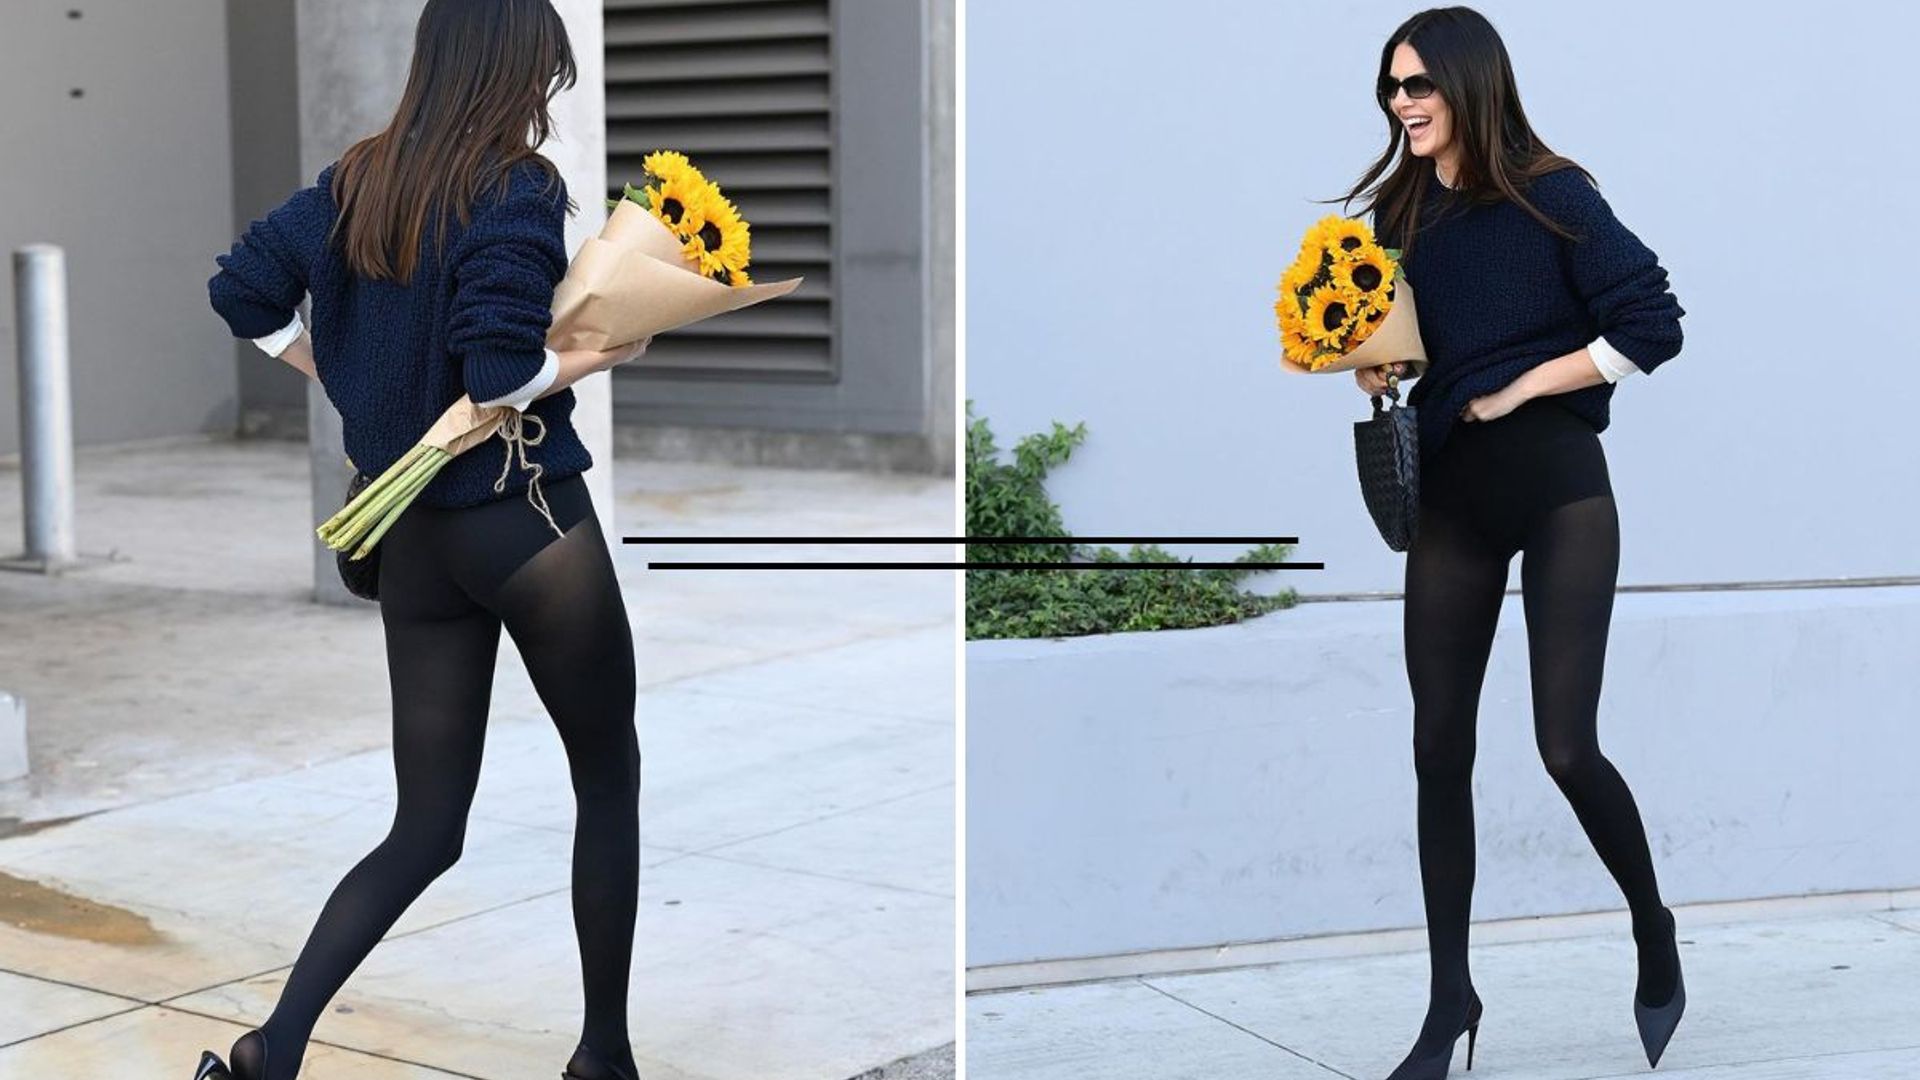 Kendall Jenner Makes a Statement in the Streets of Paris in Bottega Veneta